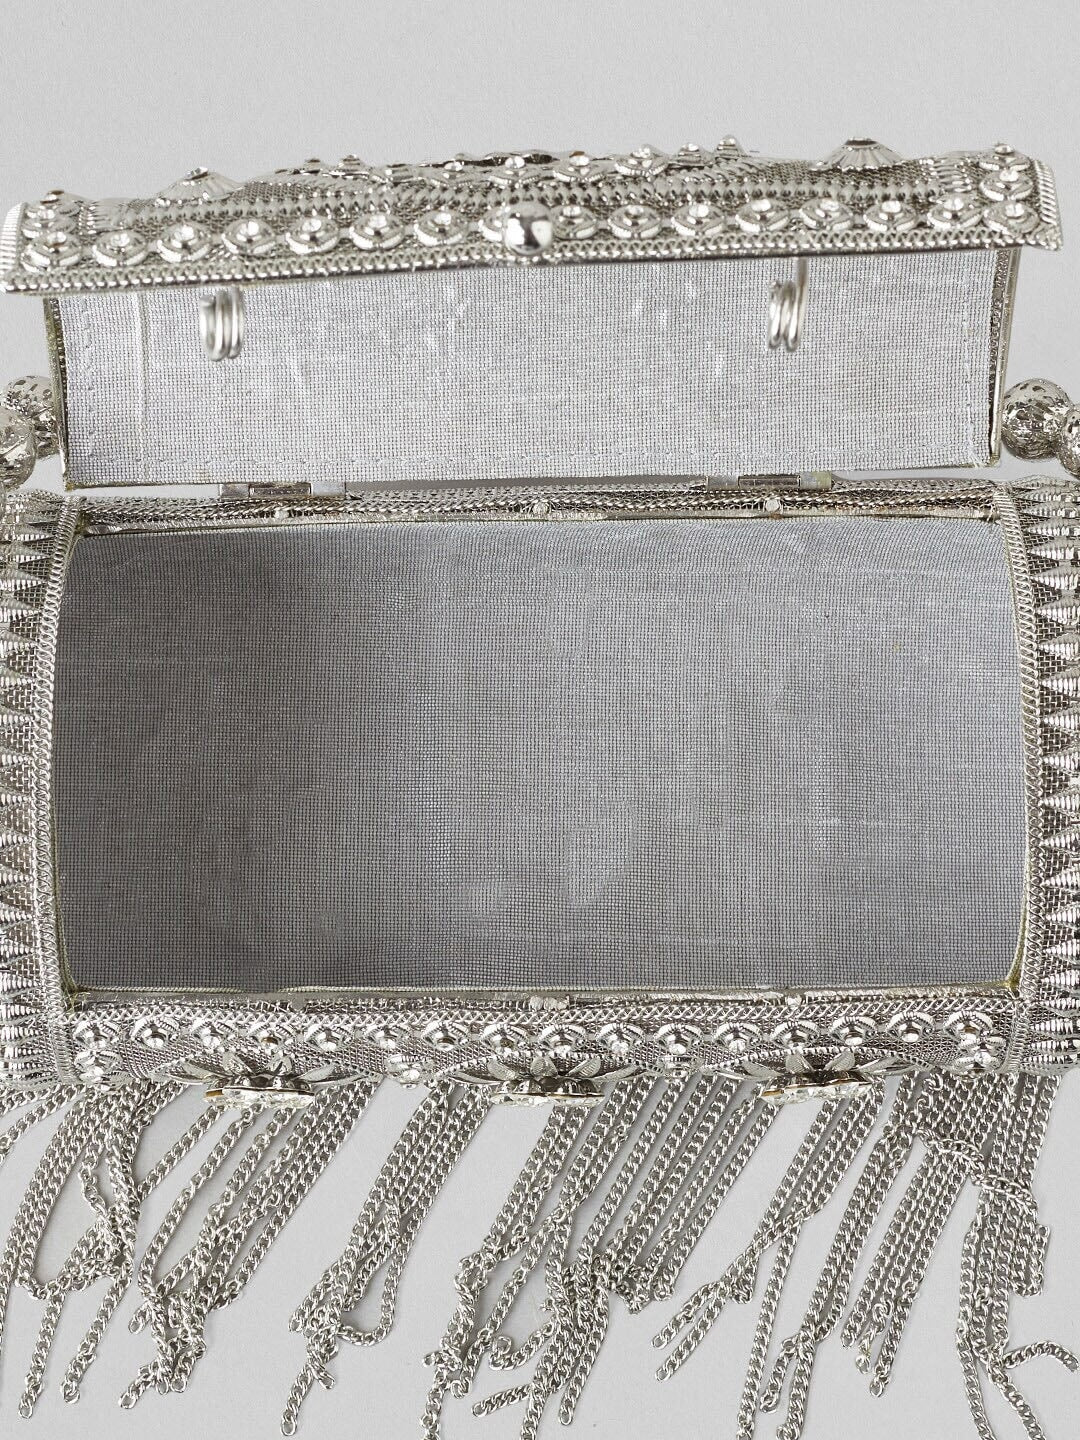 Silver-Toned Embellished Embroidered Box Clutch